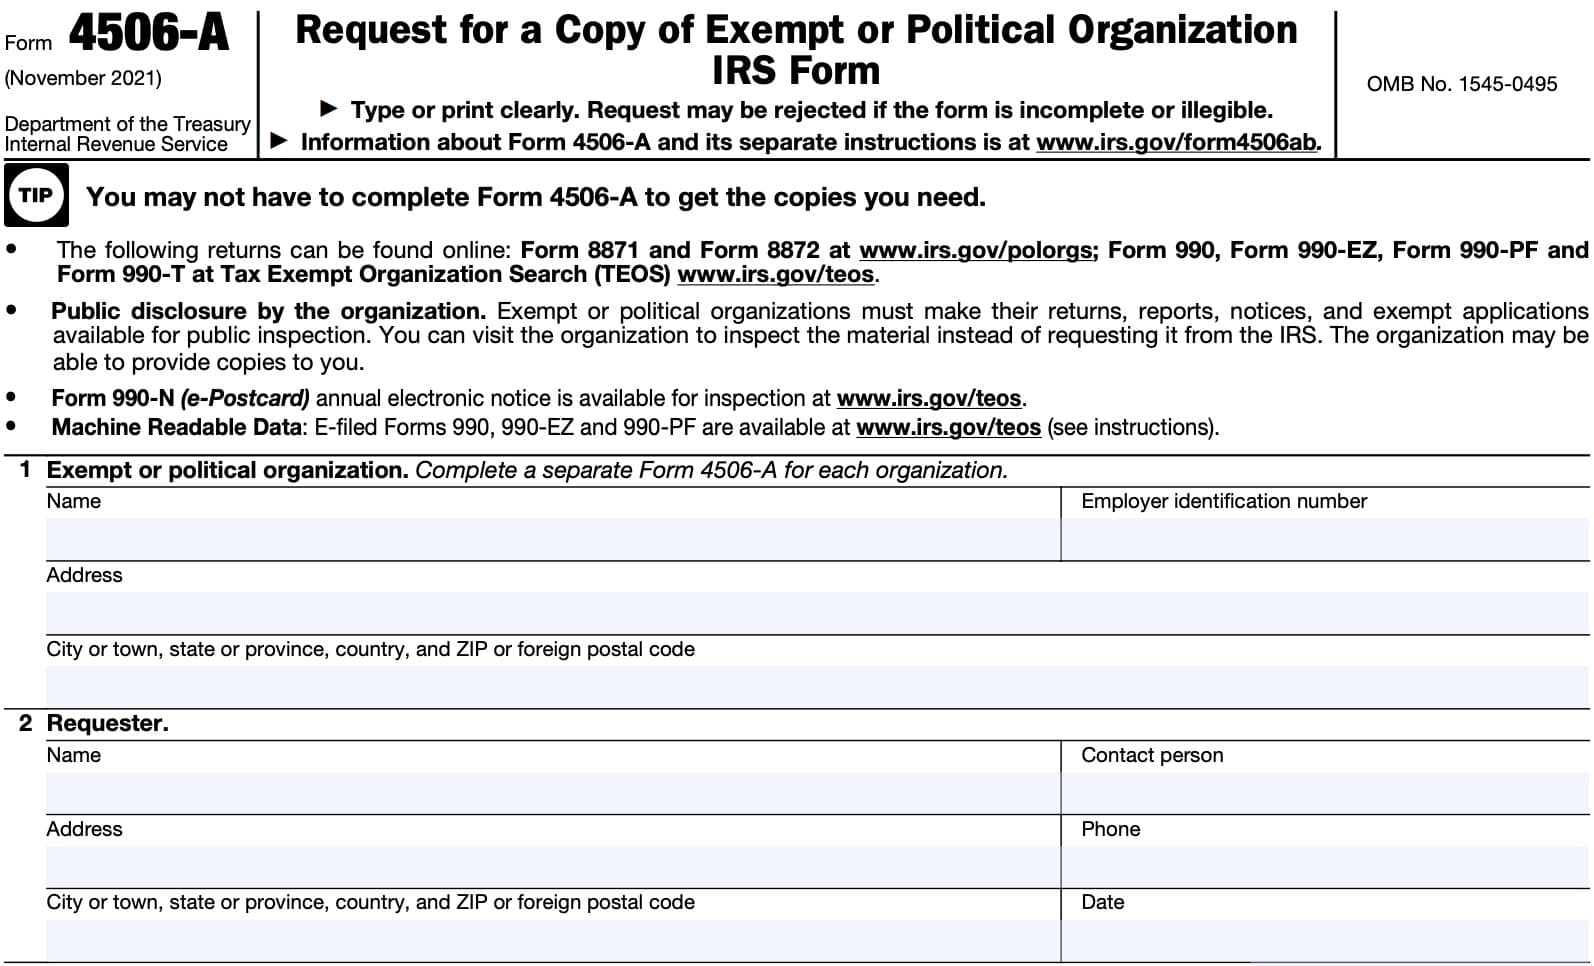 irs form 4506-a, lines 1 & 2